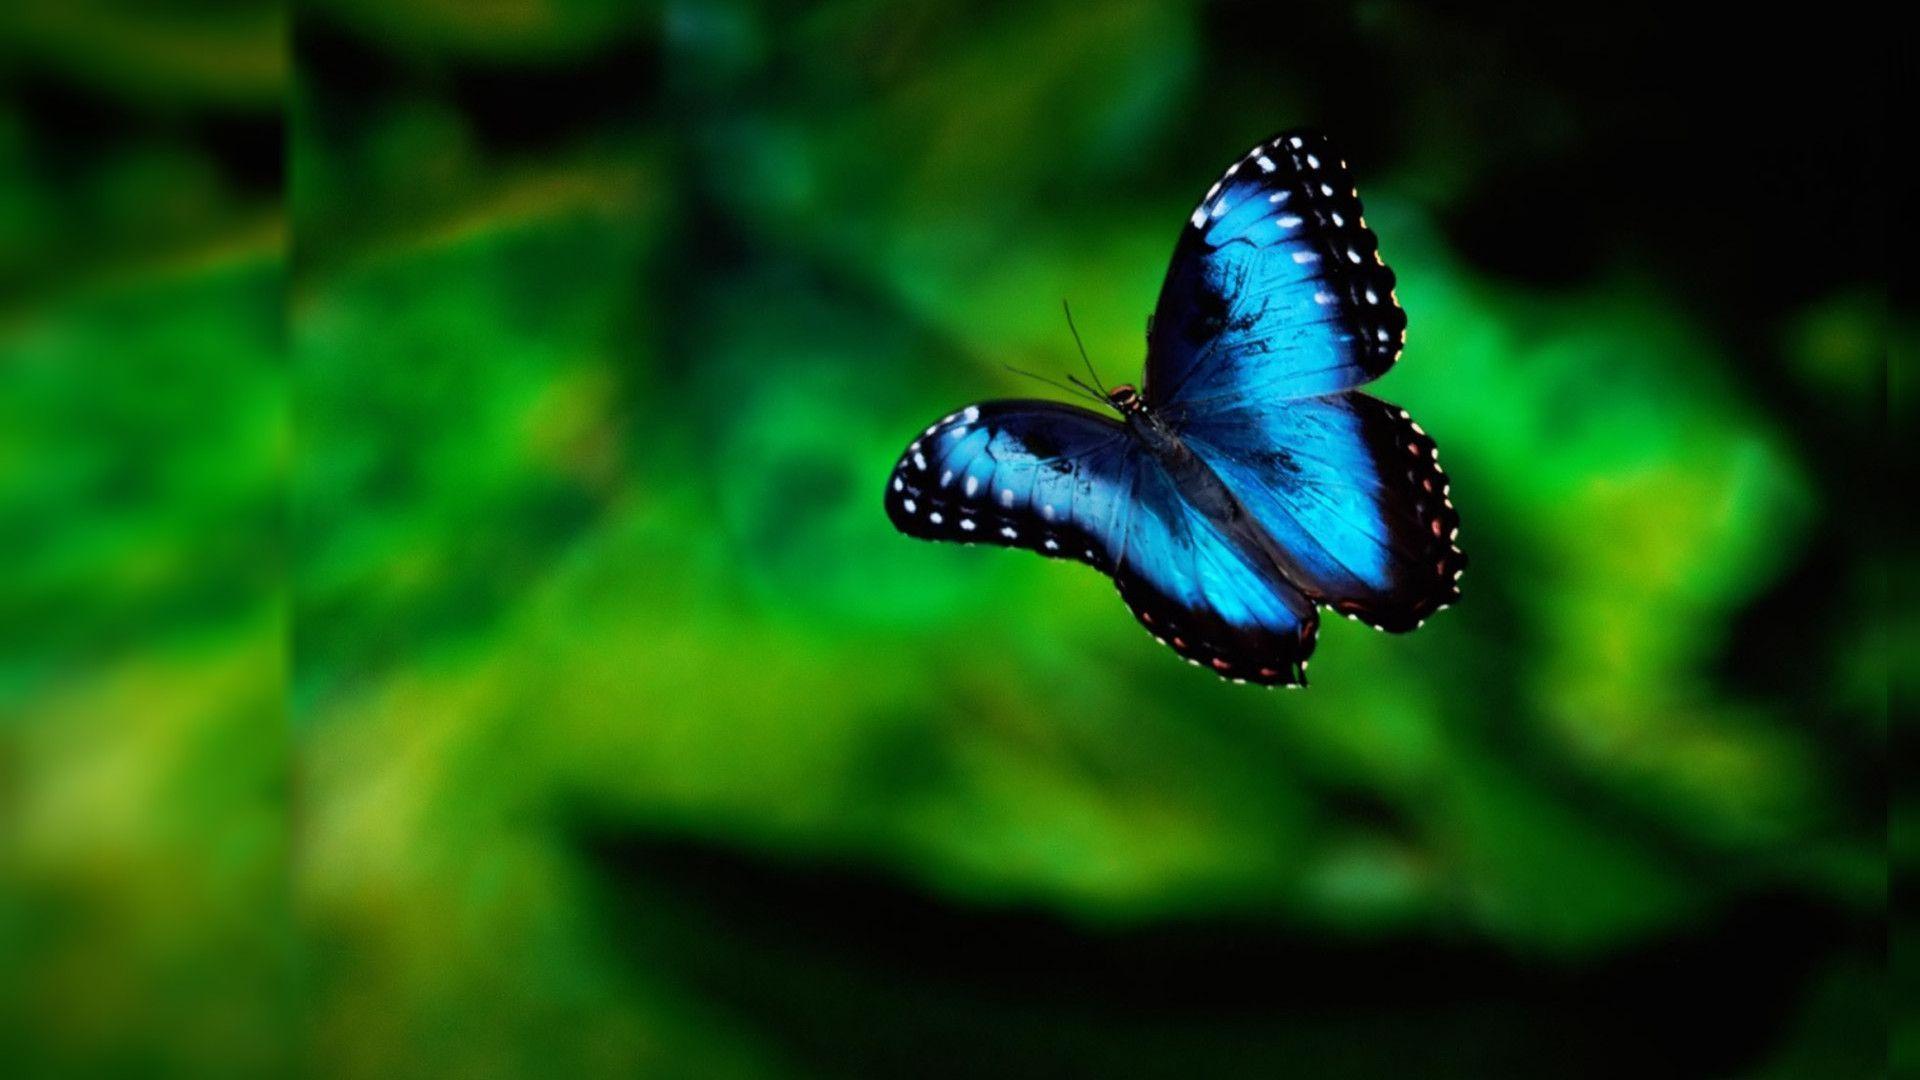 Butterfly Photography 21158 High Resolution. HD Wallpaper & Picture